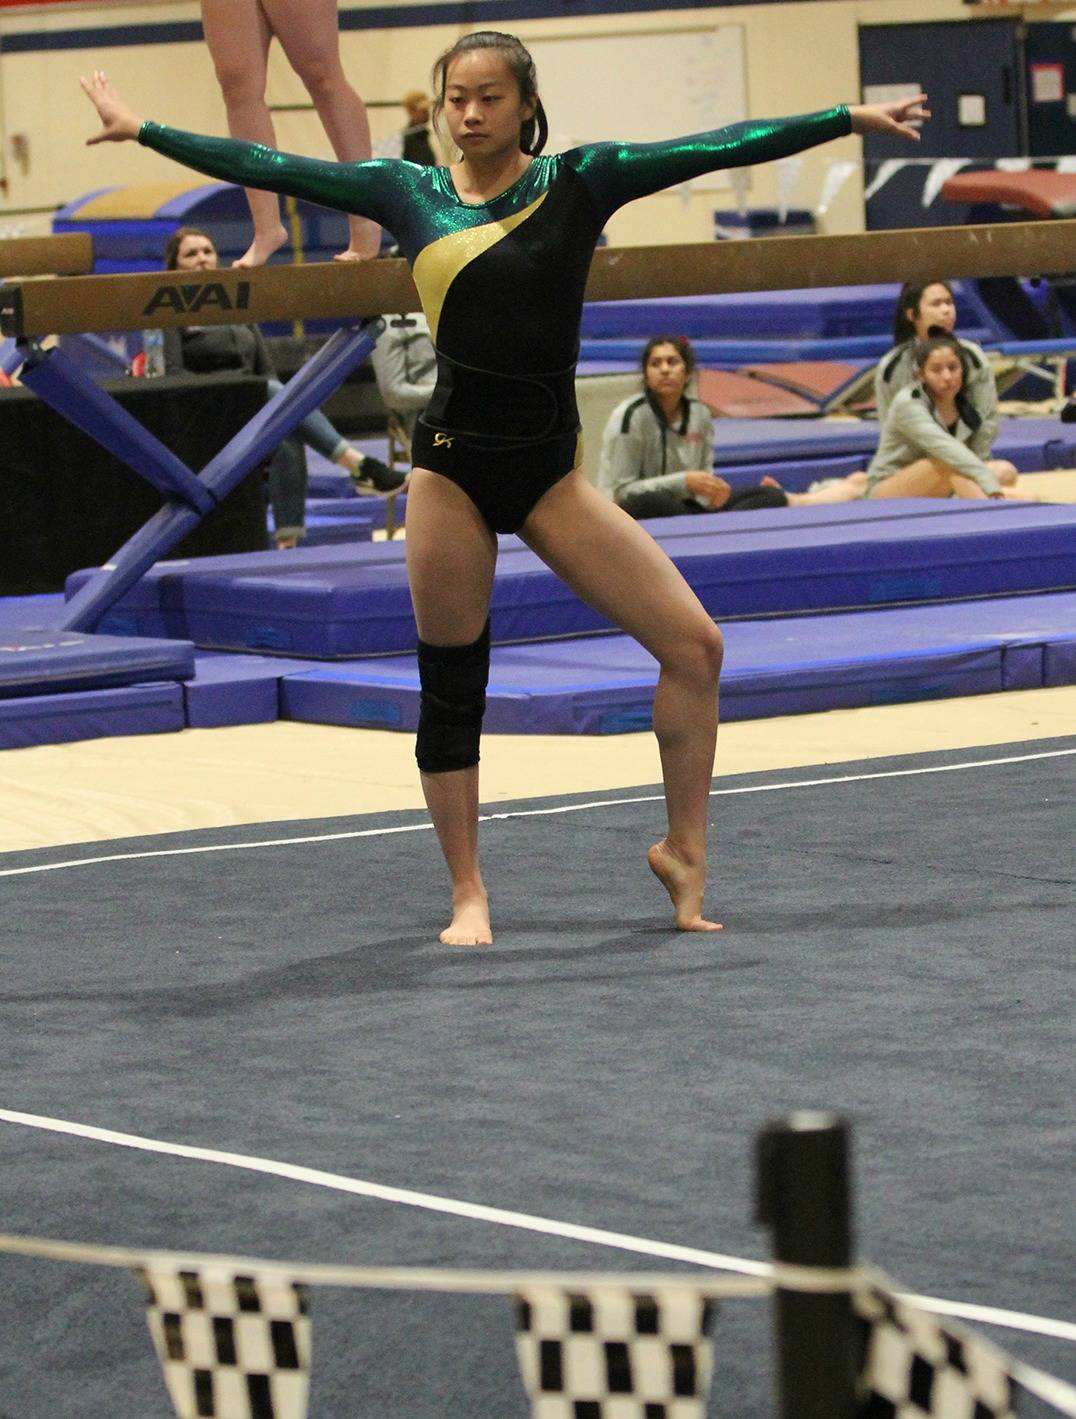 Ashley He competes on the floor exercise this season. Courtesy photo